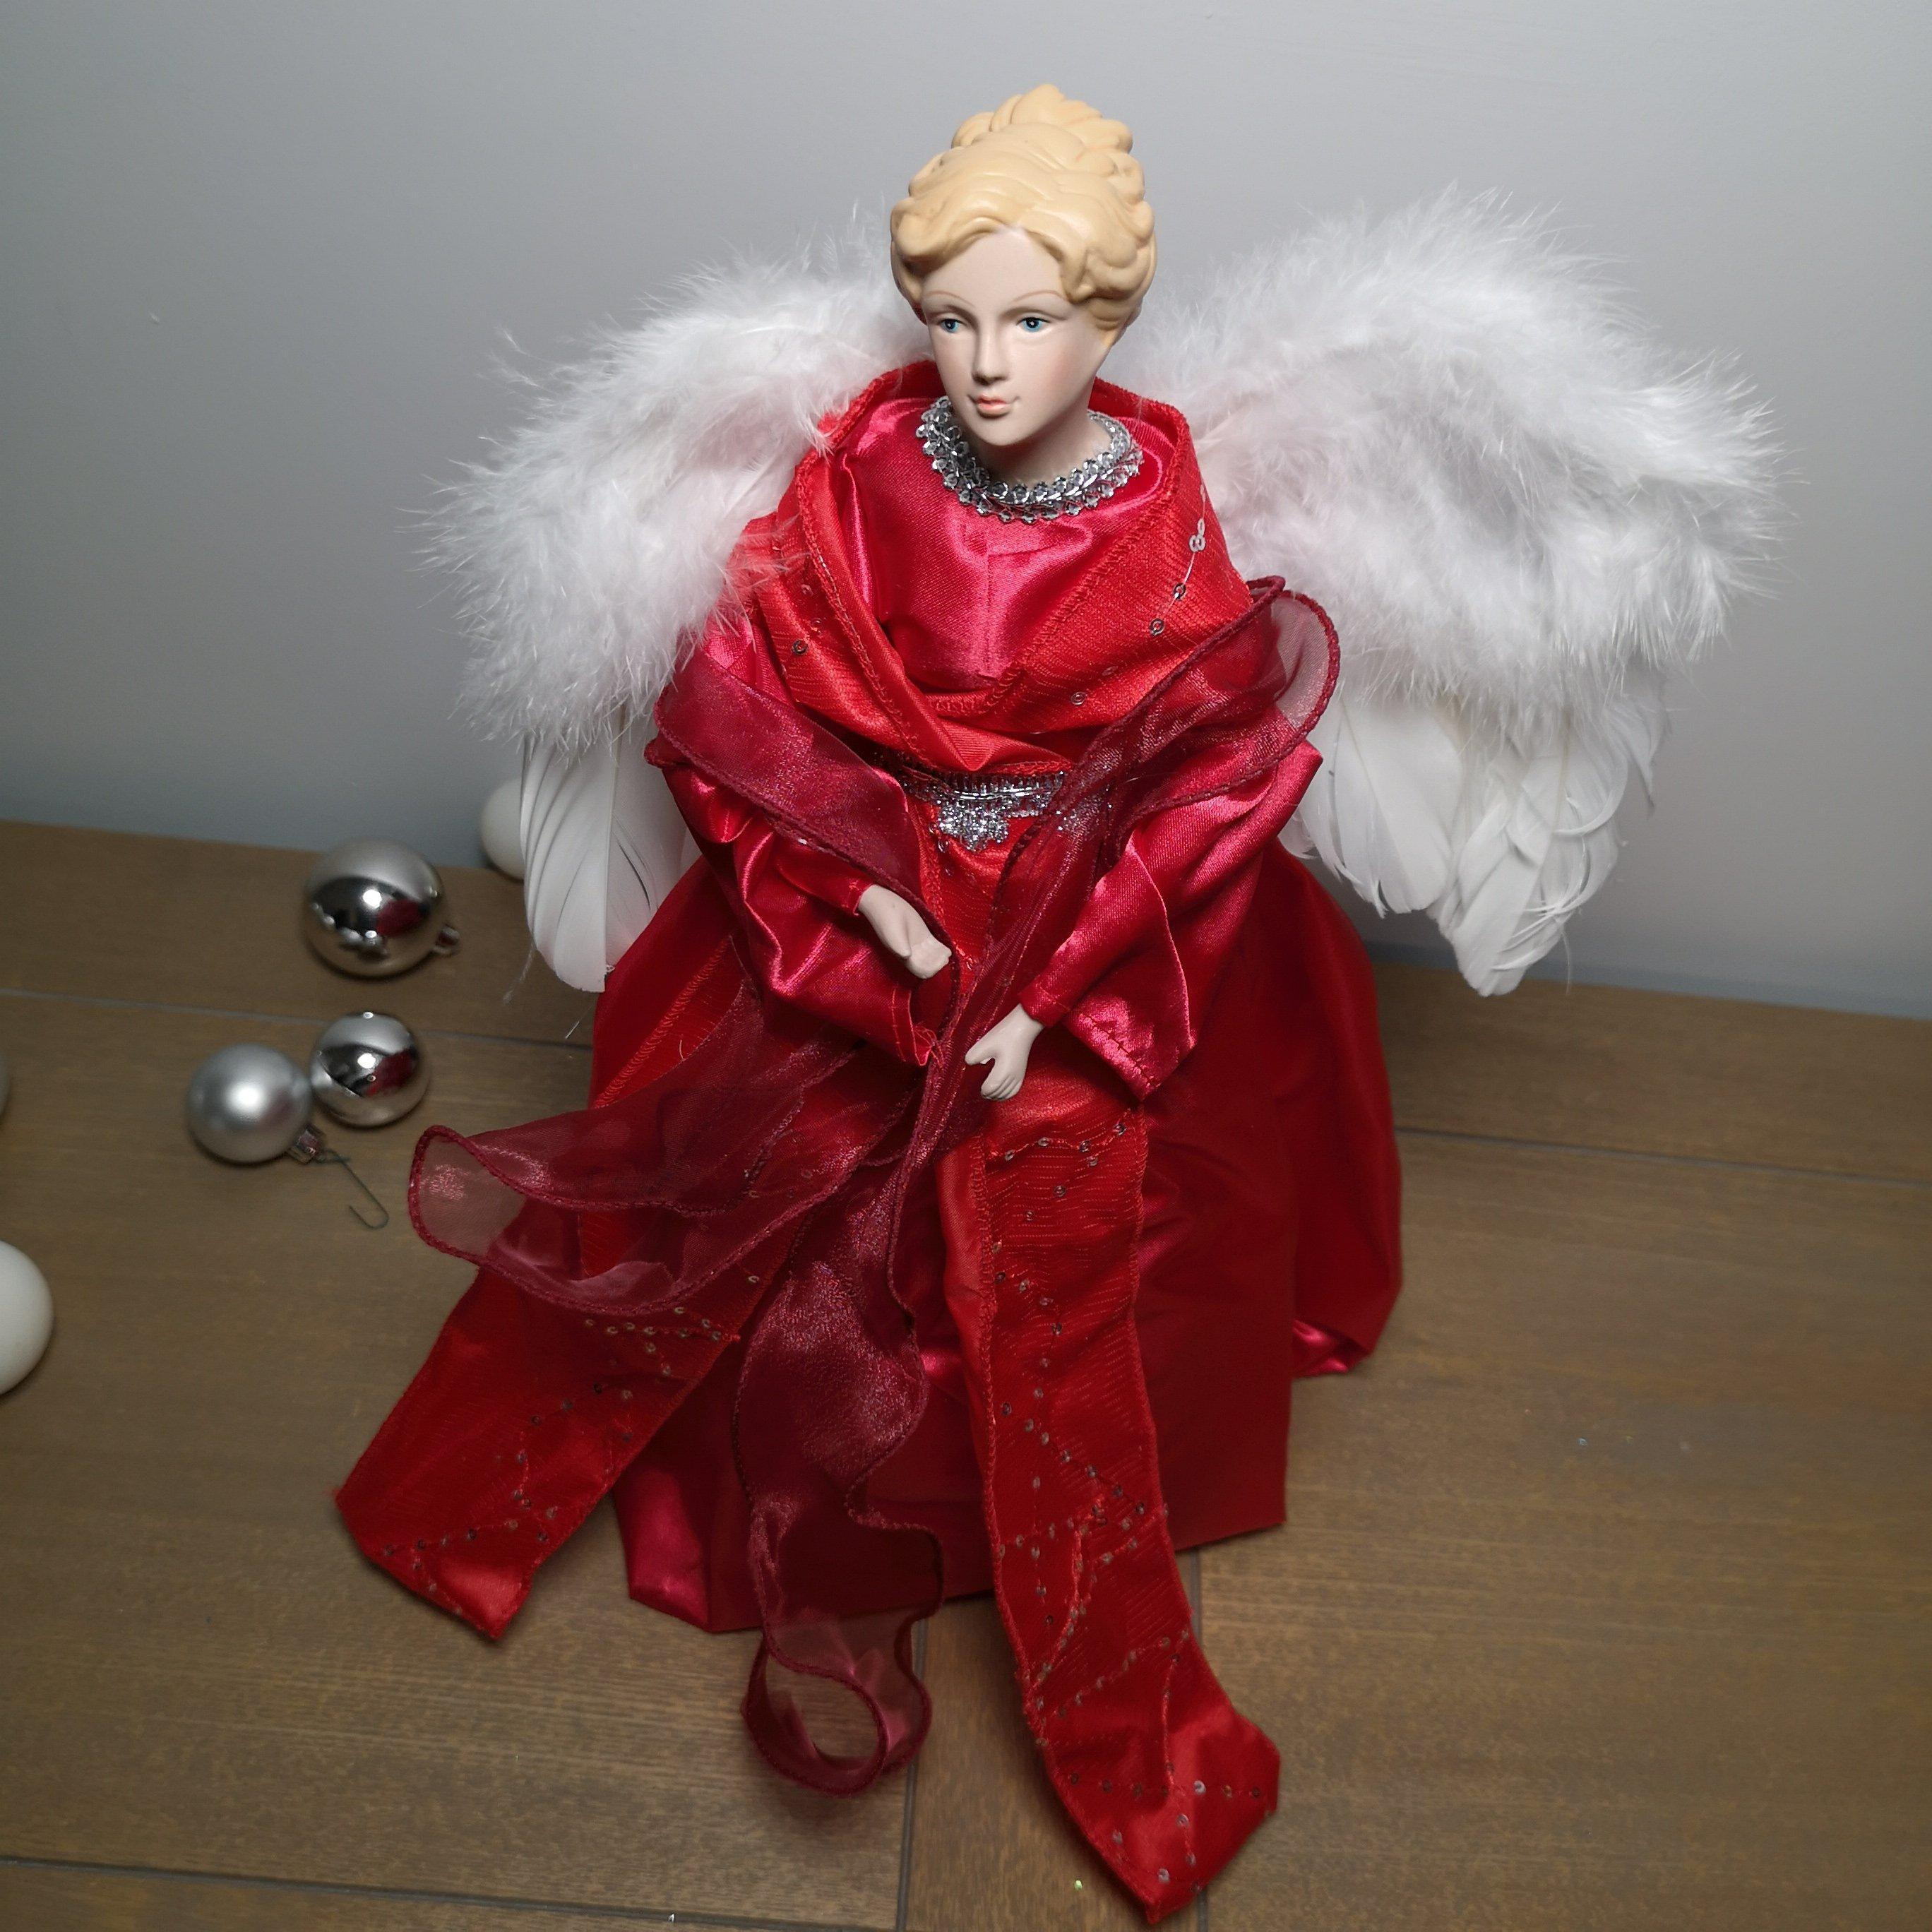 45cm Premier Christmas Angel Tree Topper Decoration in Red and Silver - image 1